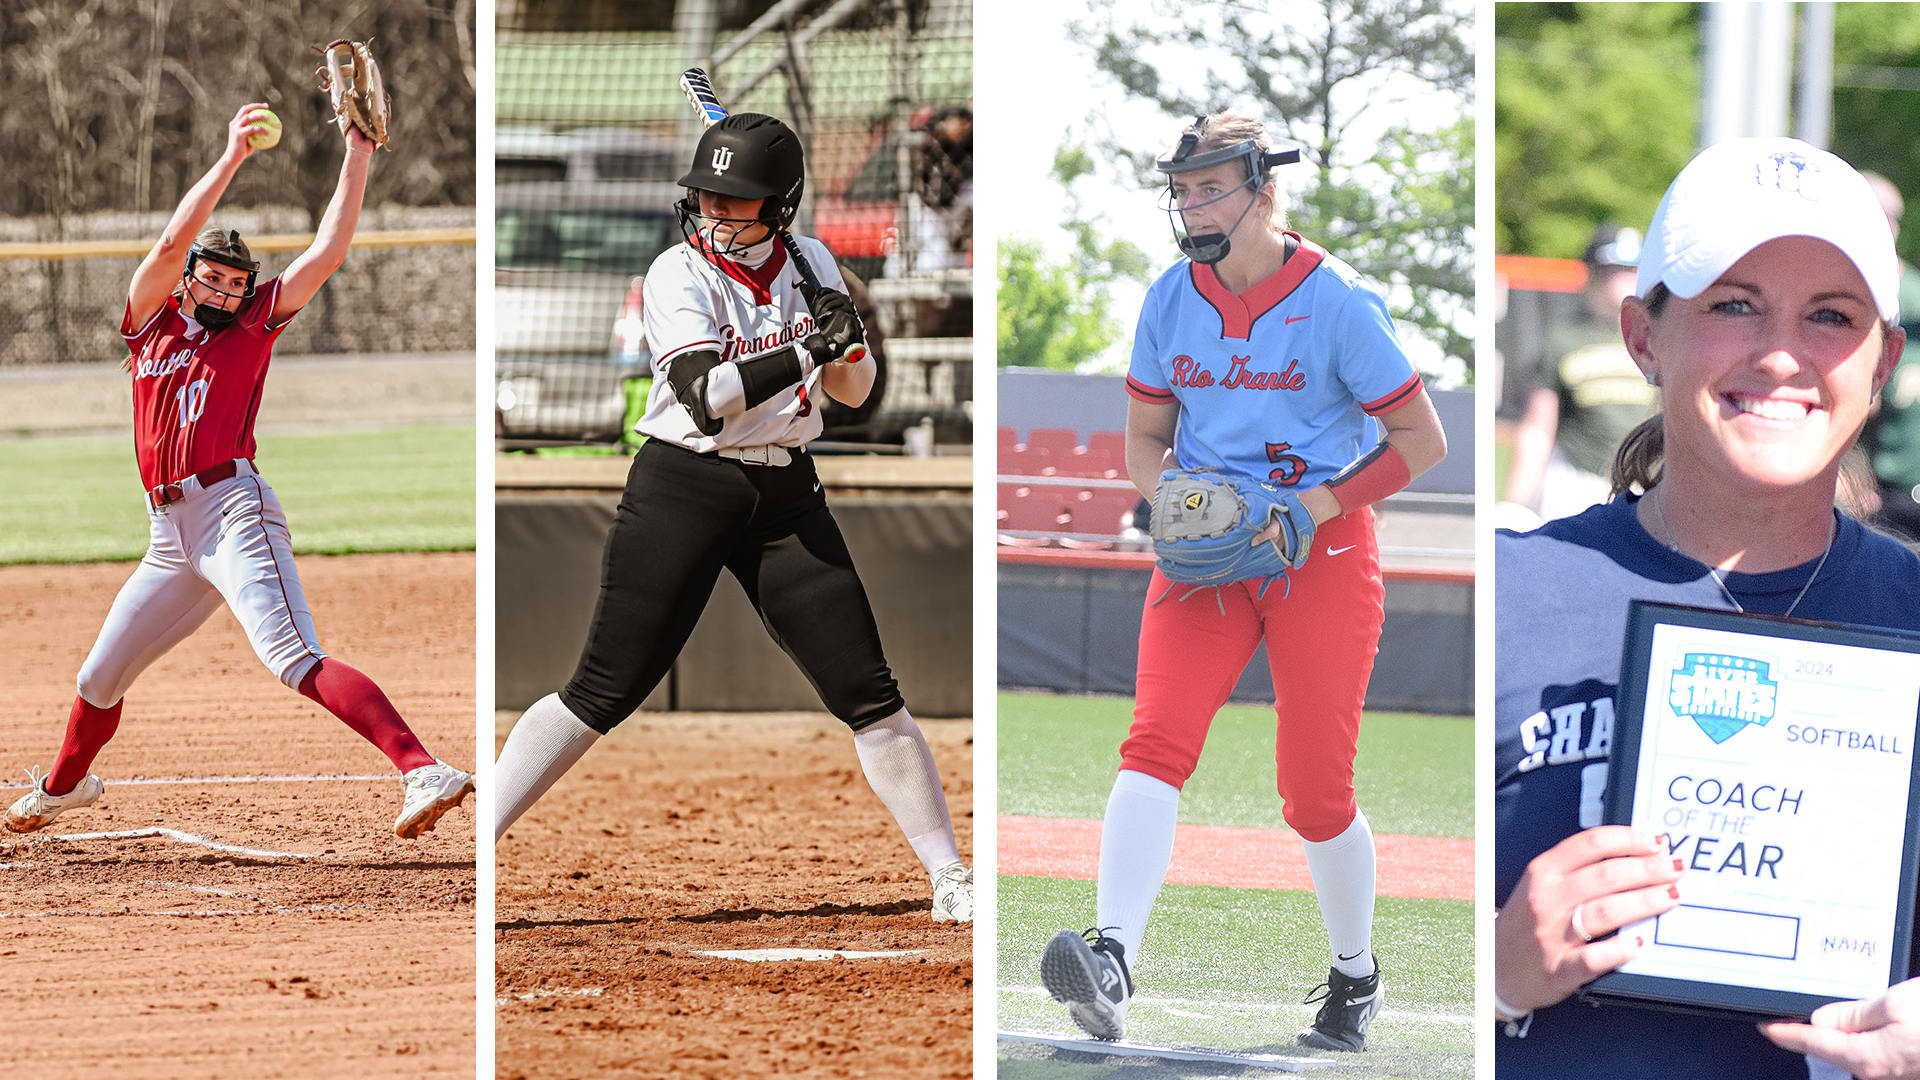 The 2024 All-River States Conference Softball Teams and award winners were announced on Thursday during the RSC Softball Championship at Little Creek Park in South Charleston, W.Va. Major award winners included, from left to right, IU Southeast's Madison Wathen (Pitcher of the Year); IU Southeast's Autumn Oehlstrom (Player of the Year); Rio Grande's Madison Wathen (Newcomer of the Year); and Kristen Bradshaw from Shawnee State University (Coach of the Year).